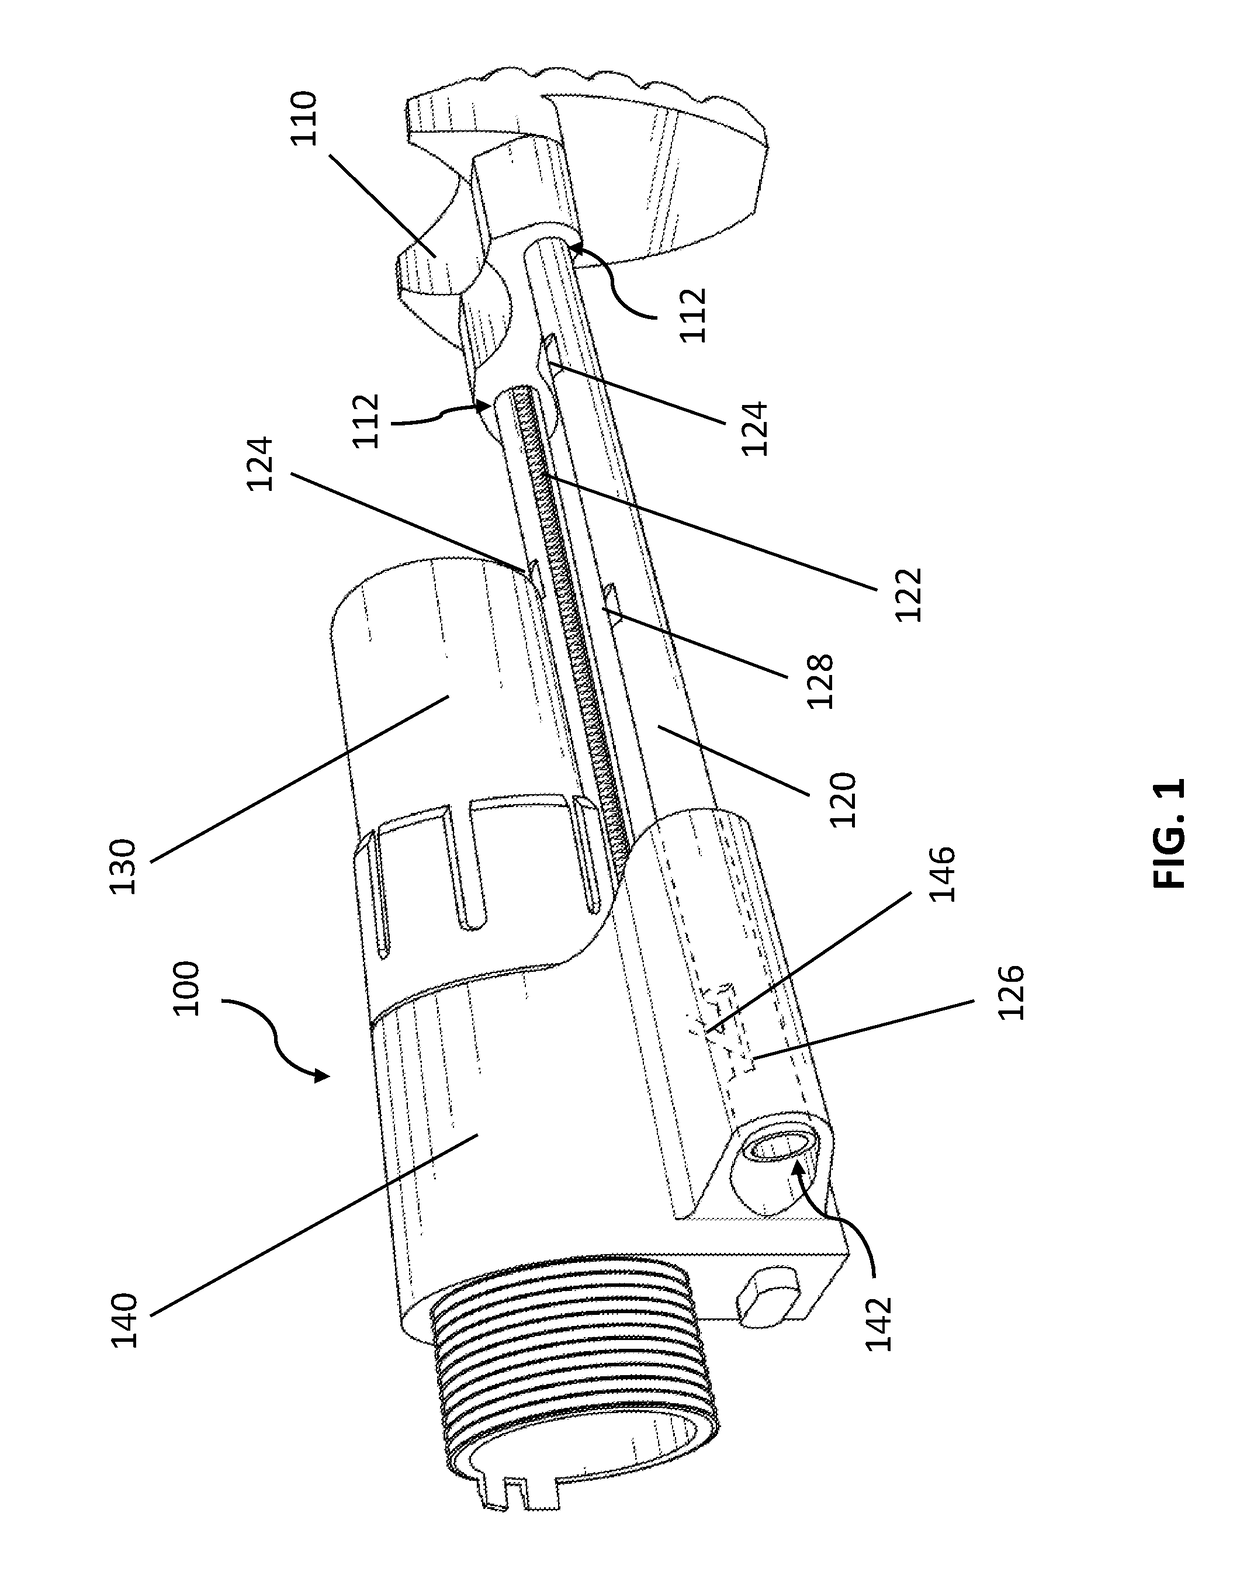 Retractable buttstock for firearms